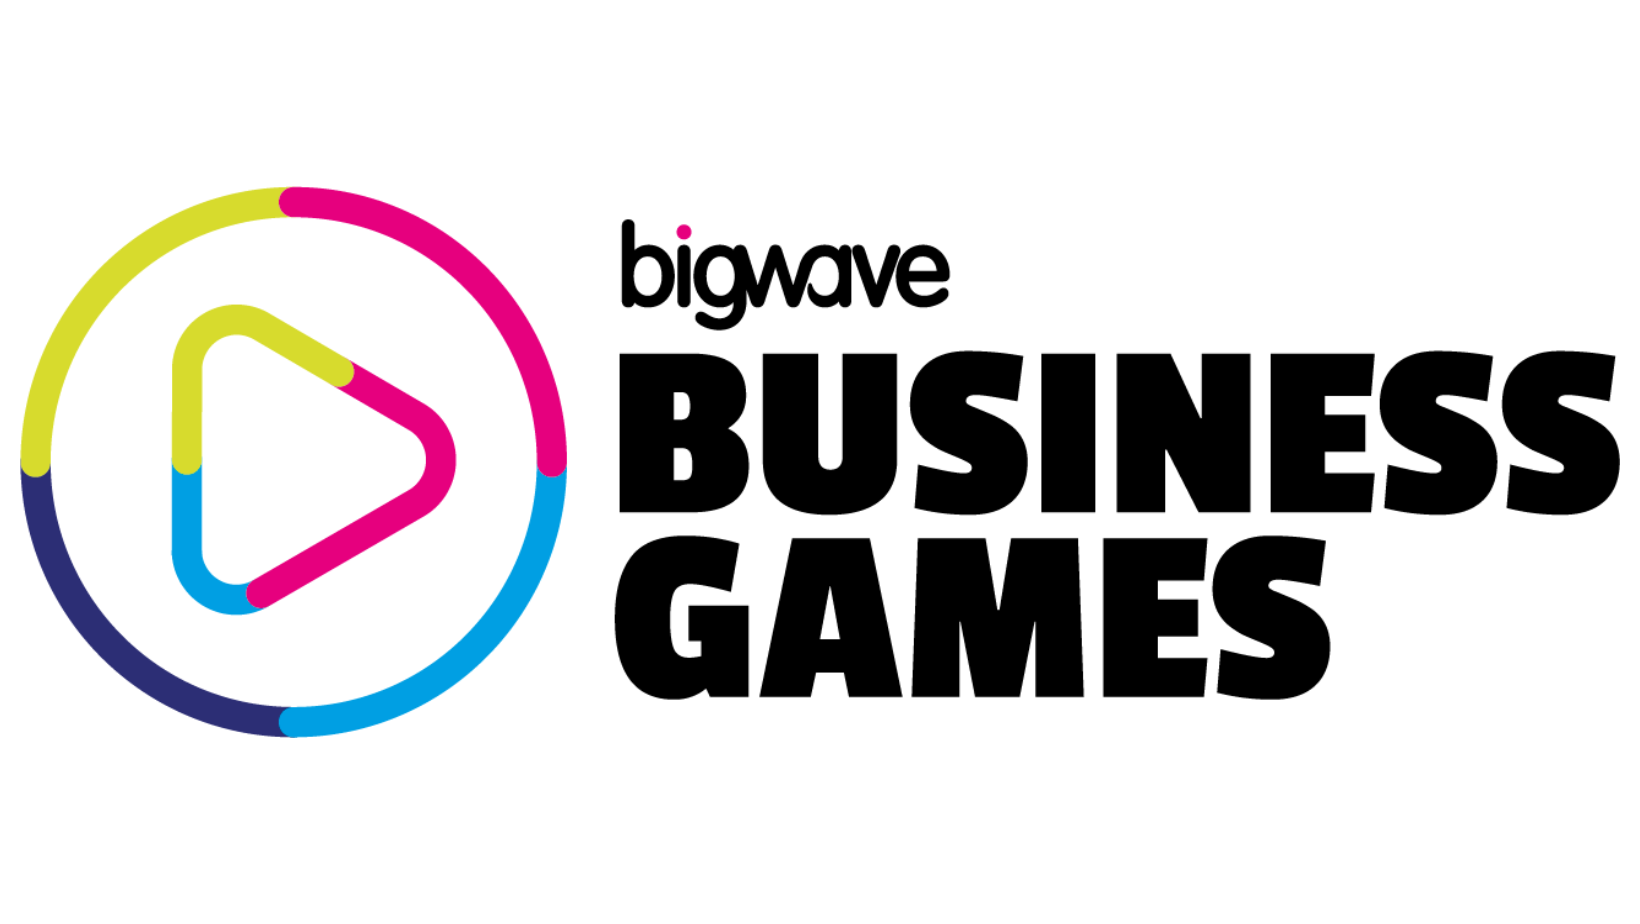 The Bigwave Business Games Return To Plymouth!